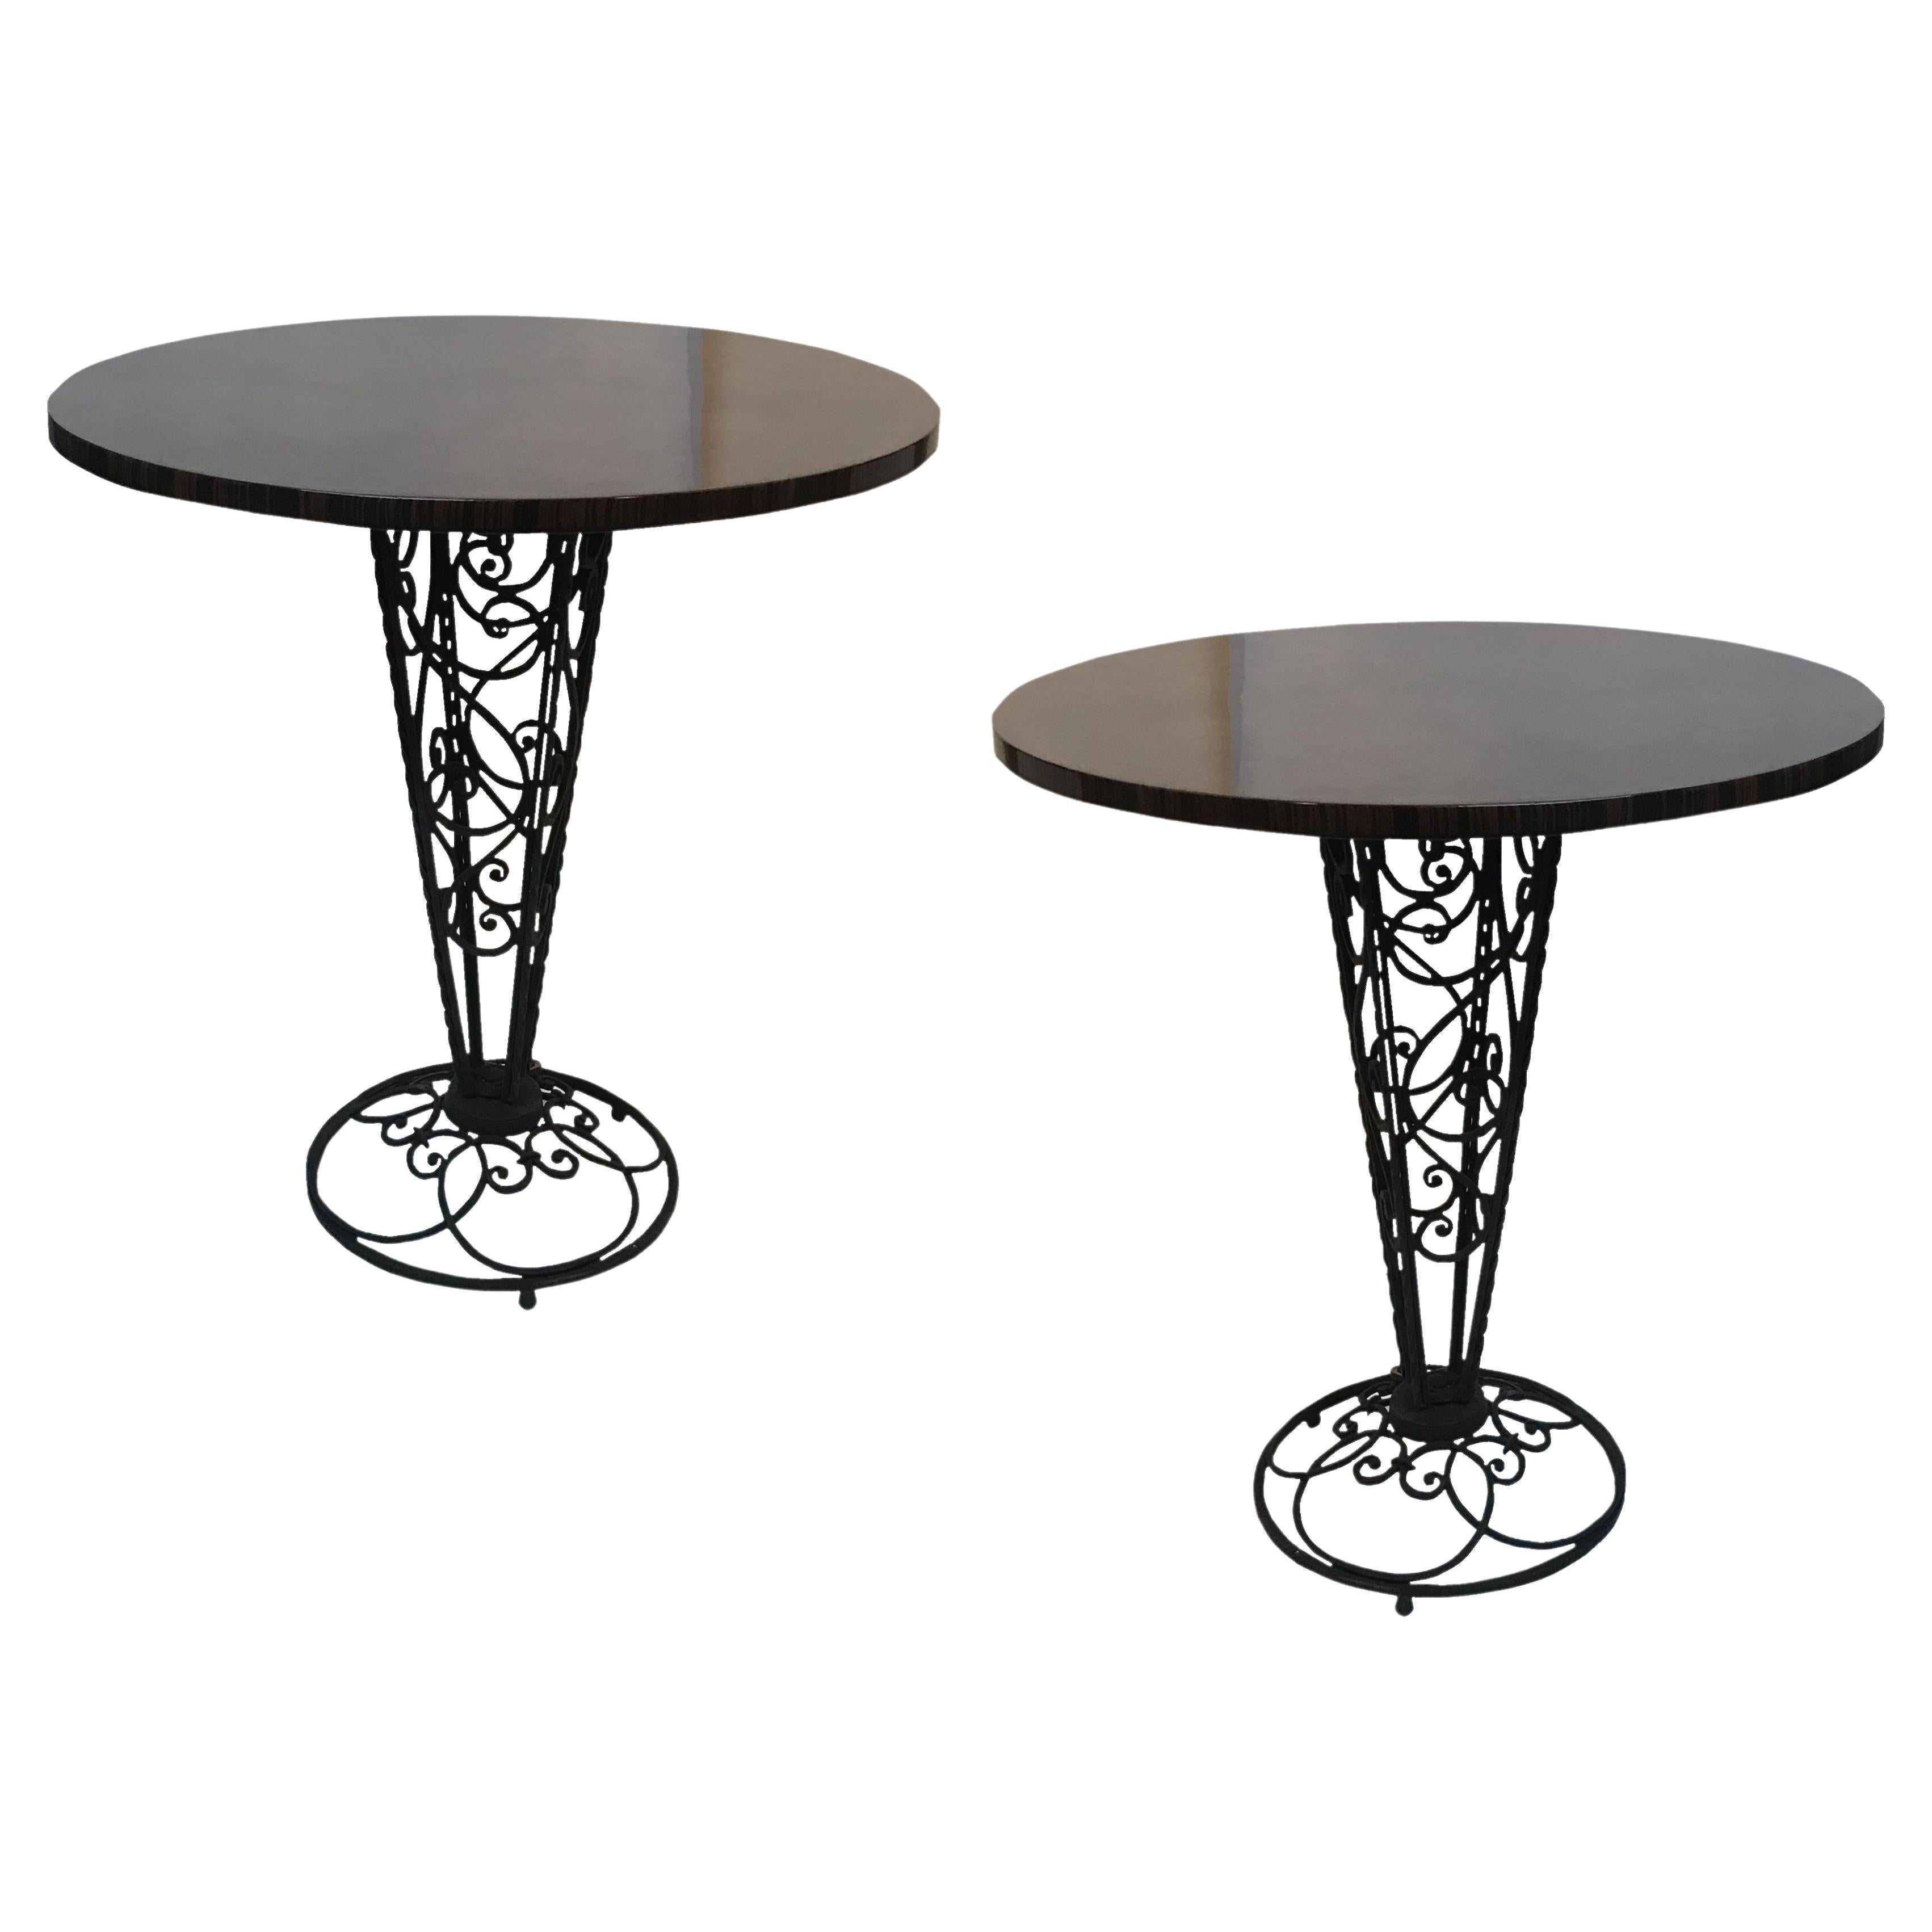 2 Tables in wood and iron, Art Deco, France, 1930